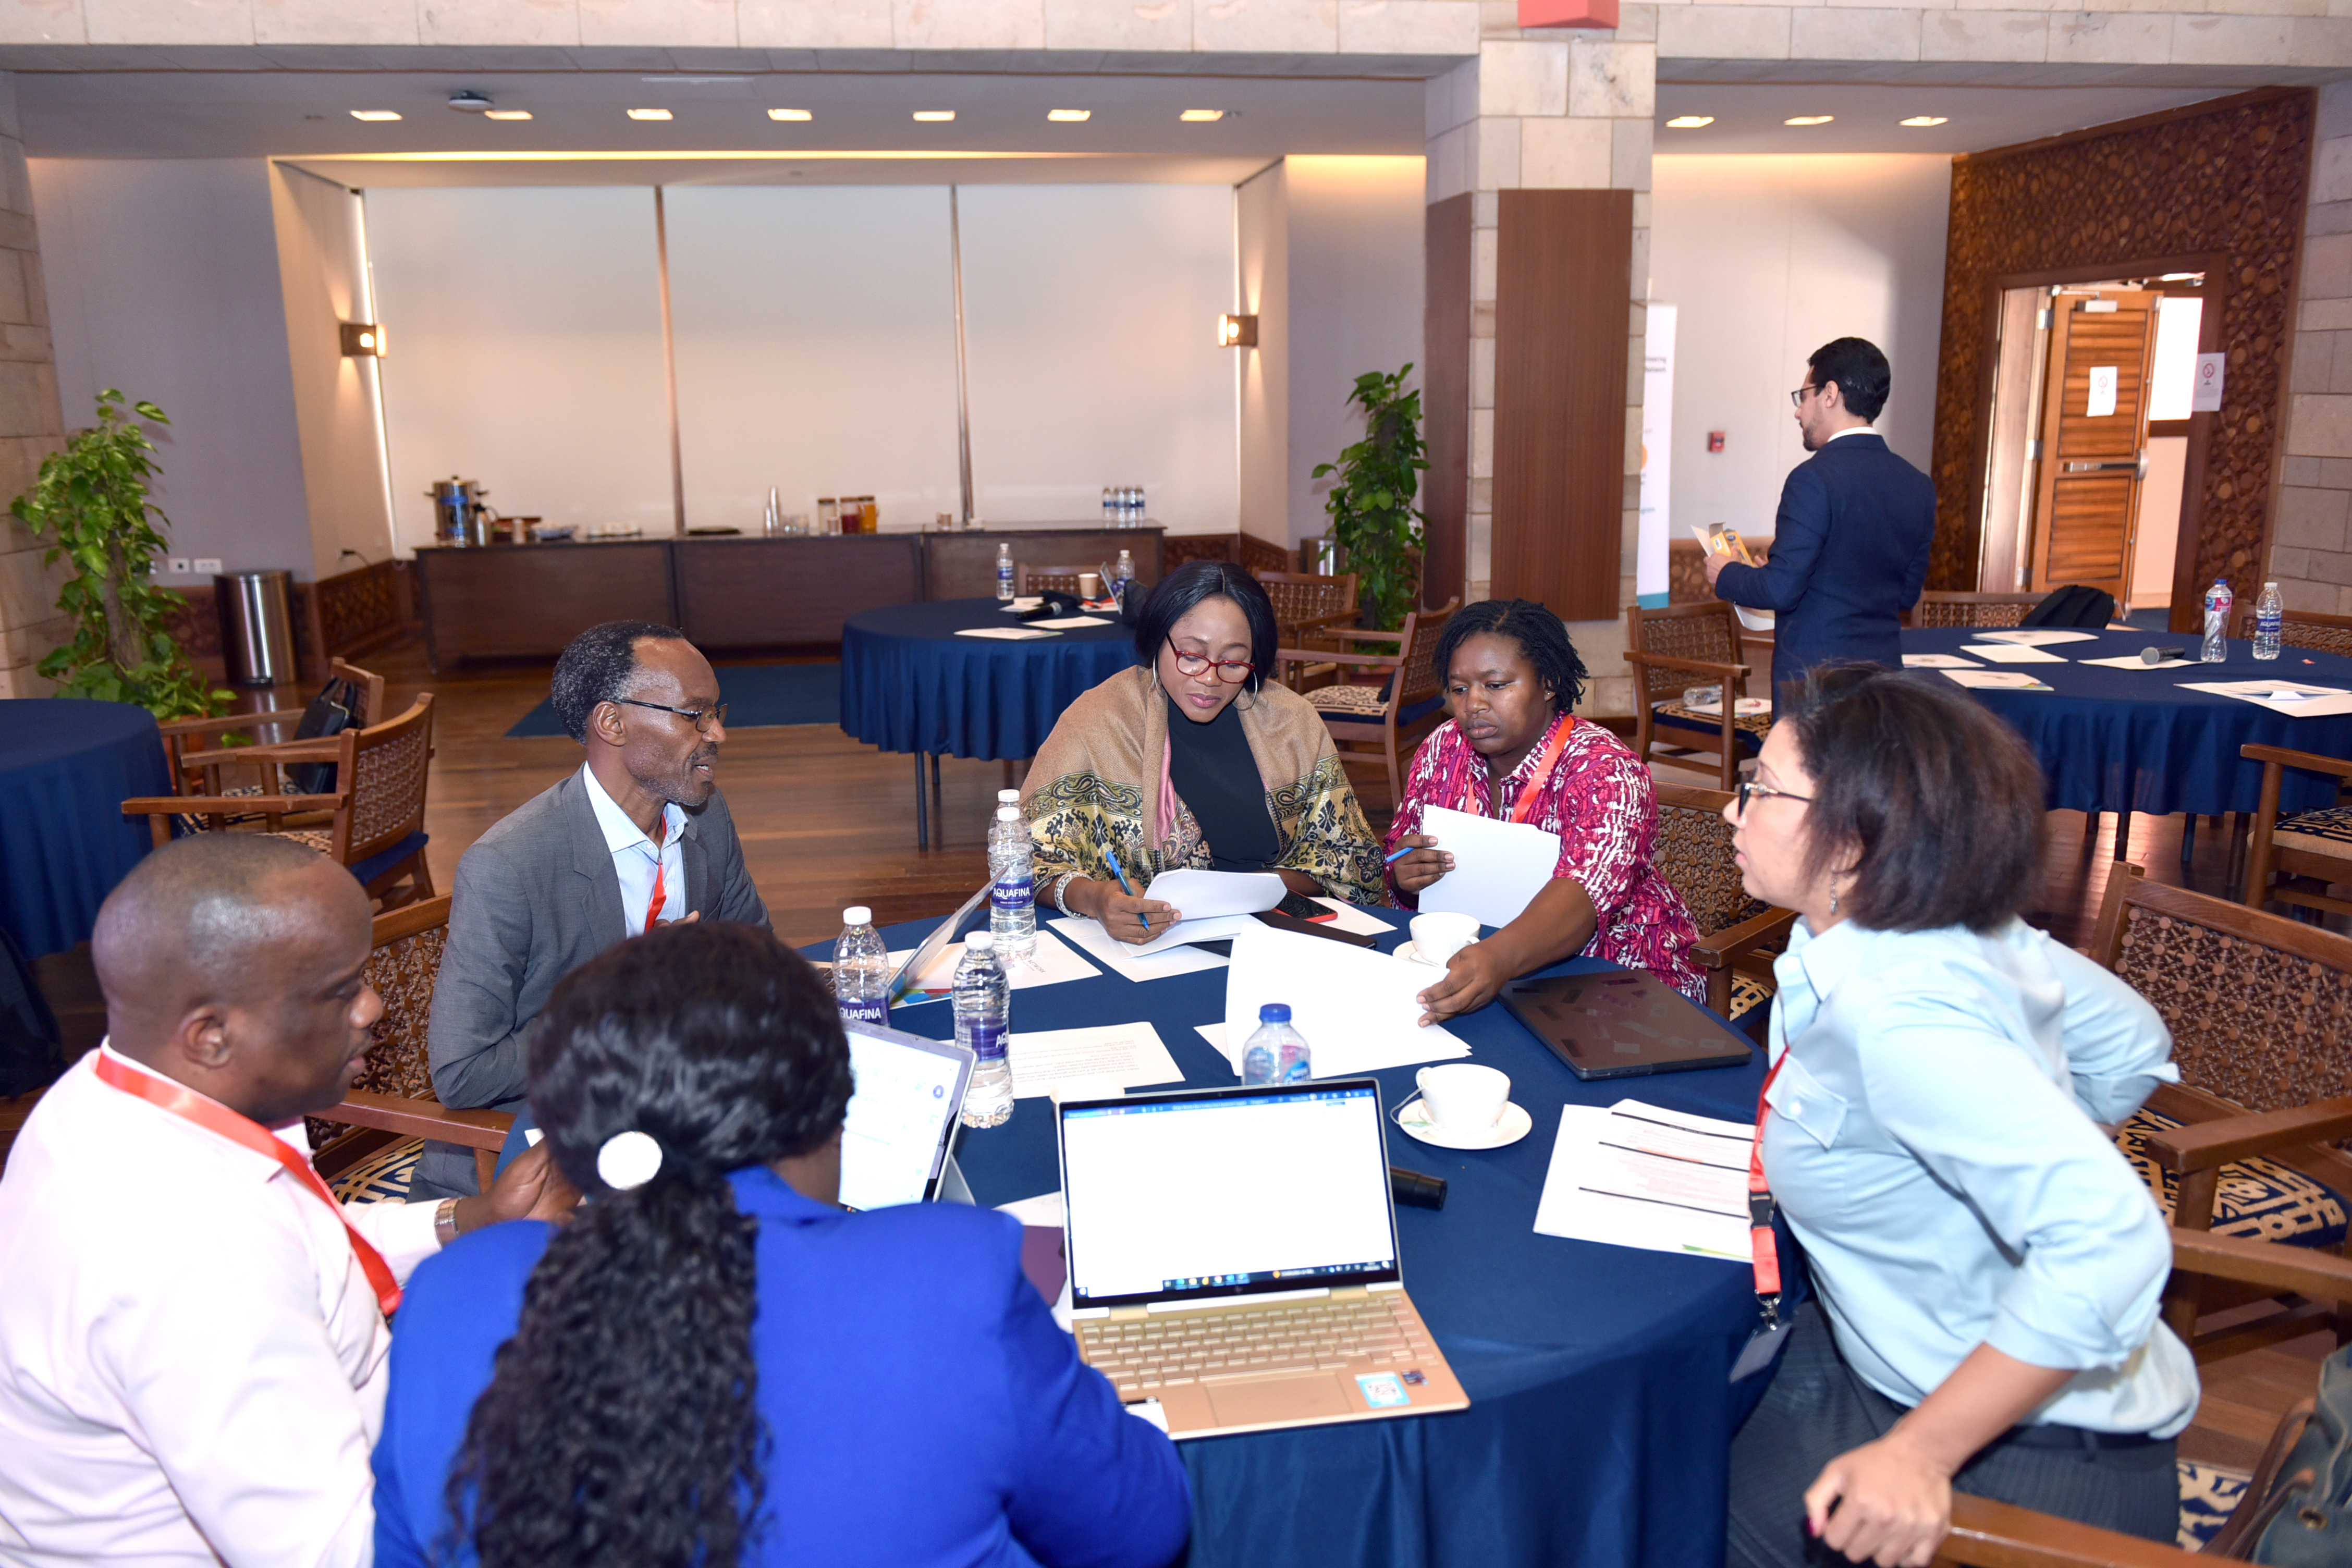 A group of workshop attendees collaborate at a table at the conference.